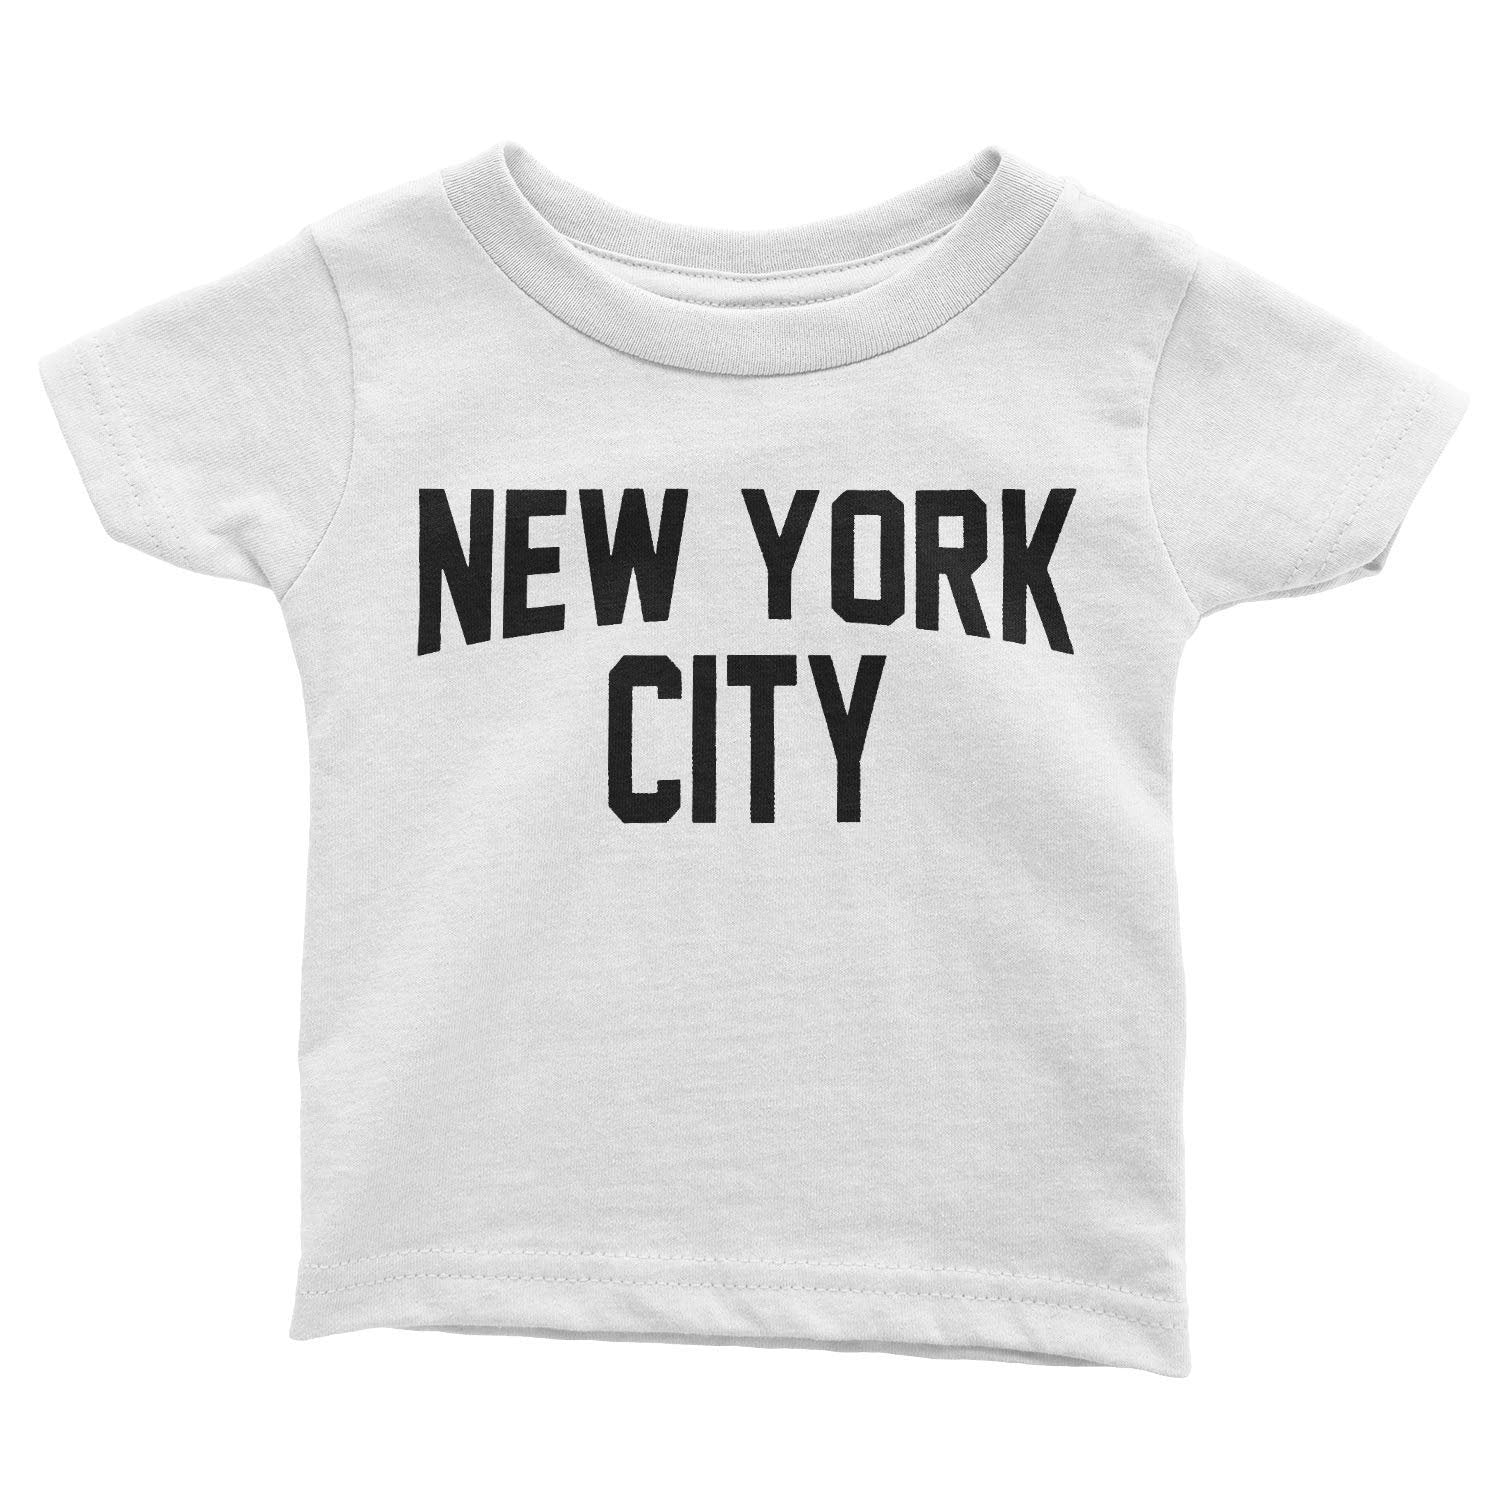 New York City Infant Tee Screen Printed Soft Cotton Baby T-Shirt